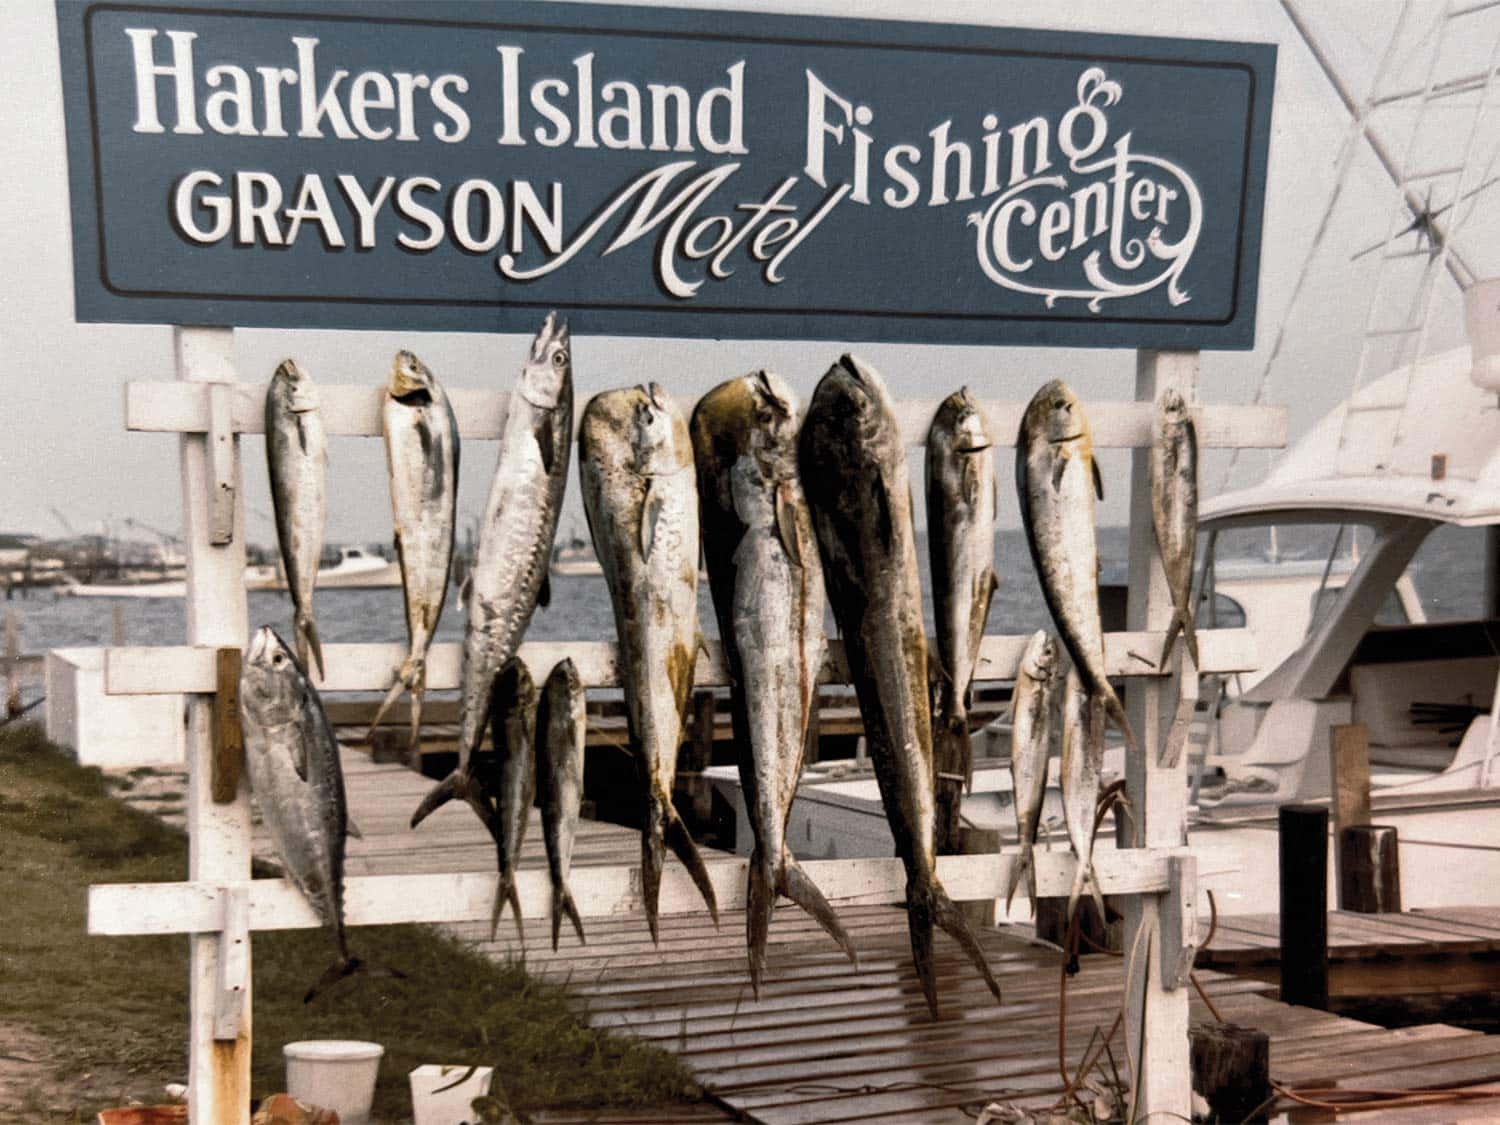 A day’s charter catch out of the newly renamed Harkers Island Fishing Center on Starflite.